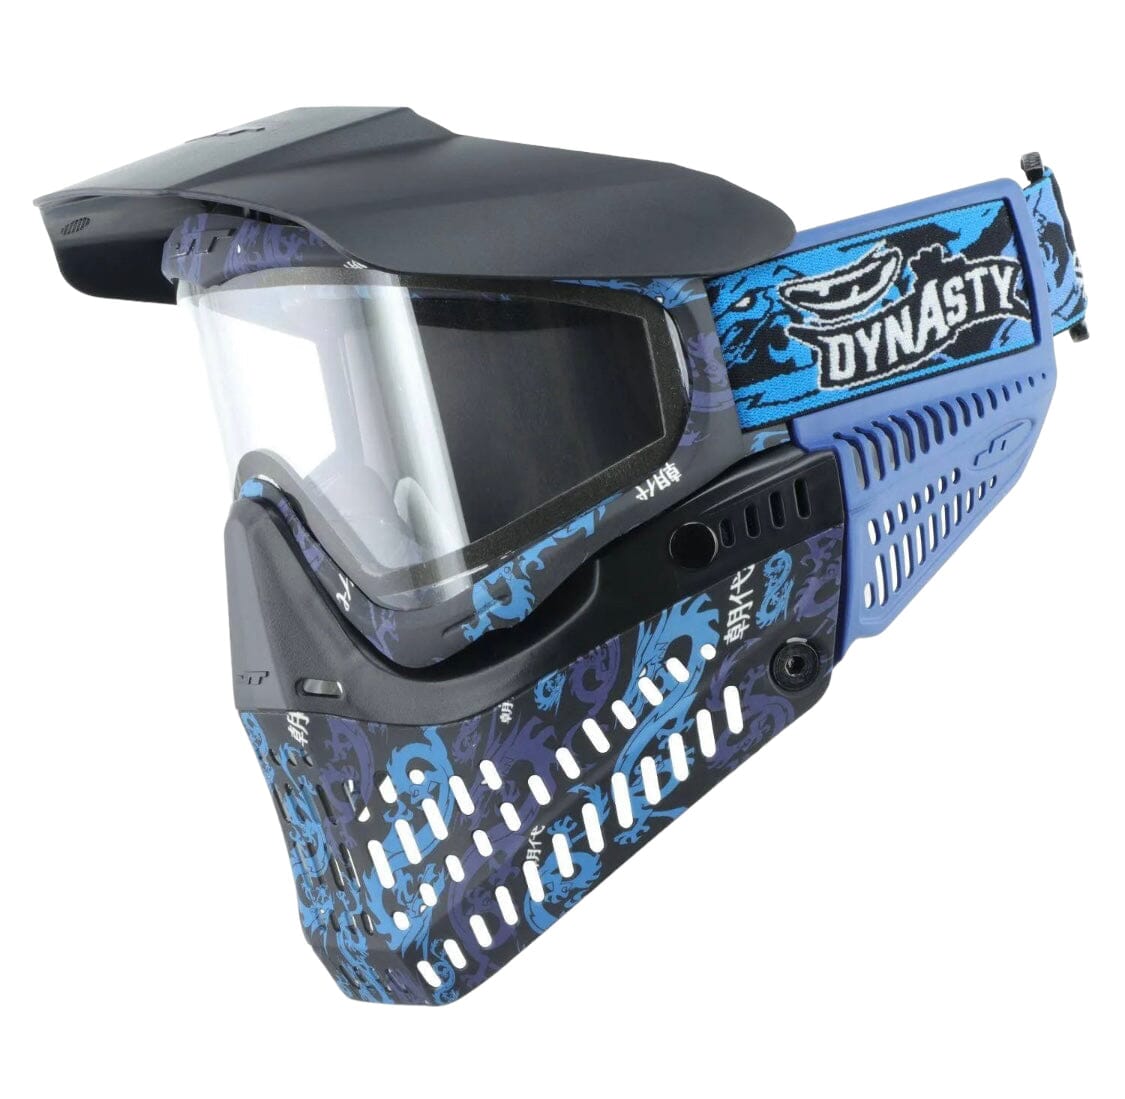 Used NEW JT ProFlex Paintball Mask - Dynasty Black w/ 1 Clear Lens Paintball Gun from CPXBrosPaintball Buy/Sell/Trade Paintball Markers, Paintball Hoppers, Paintball Masks, and Hormesis Headbands